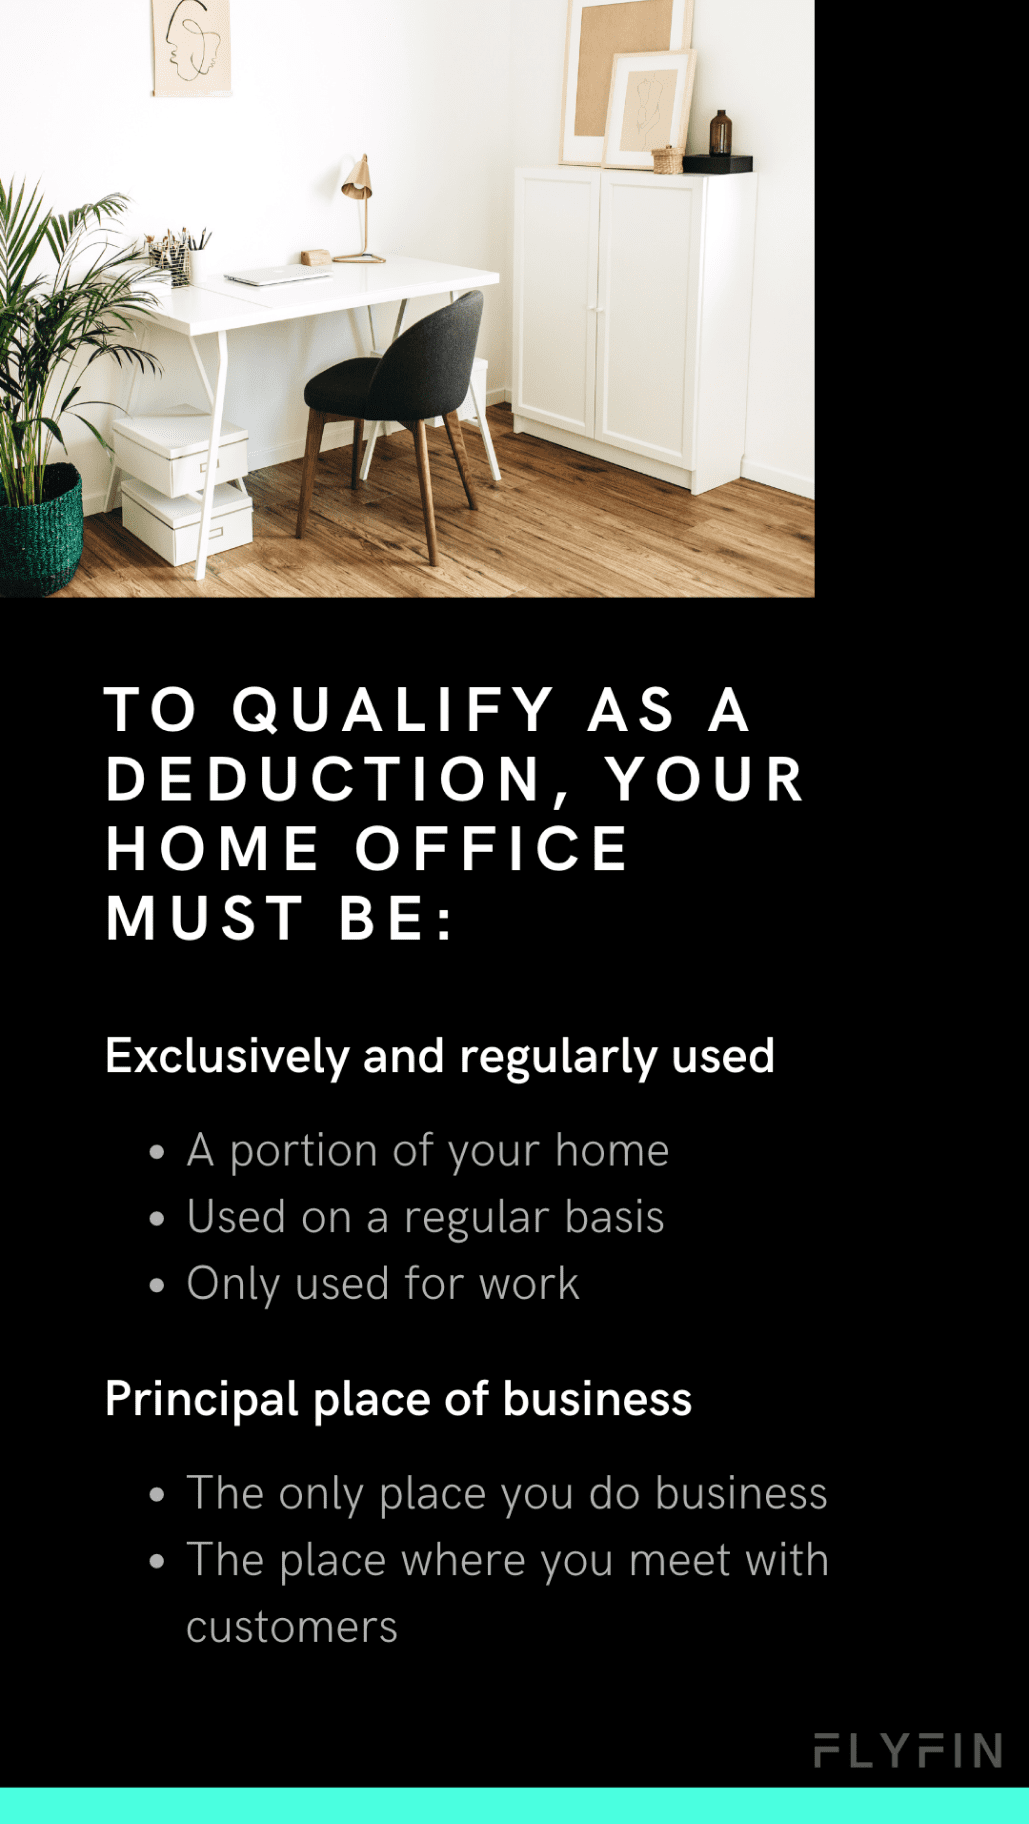 Guidelines for home office tax deduction - exclusive and regular use, principal place of business, only used for work. Relevant for self-employed, 1099, and freelancers for taxes.